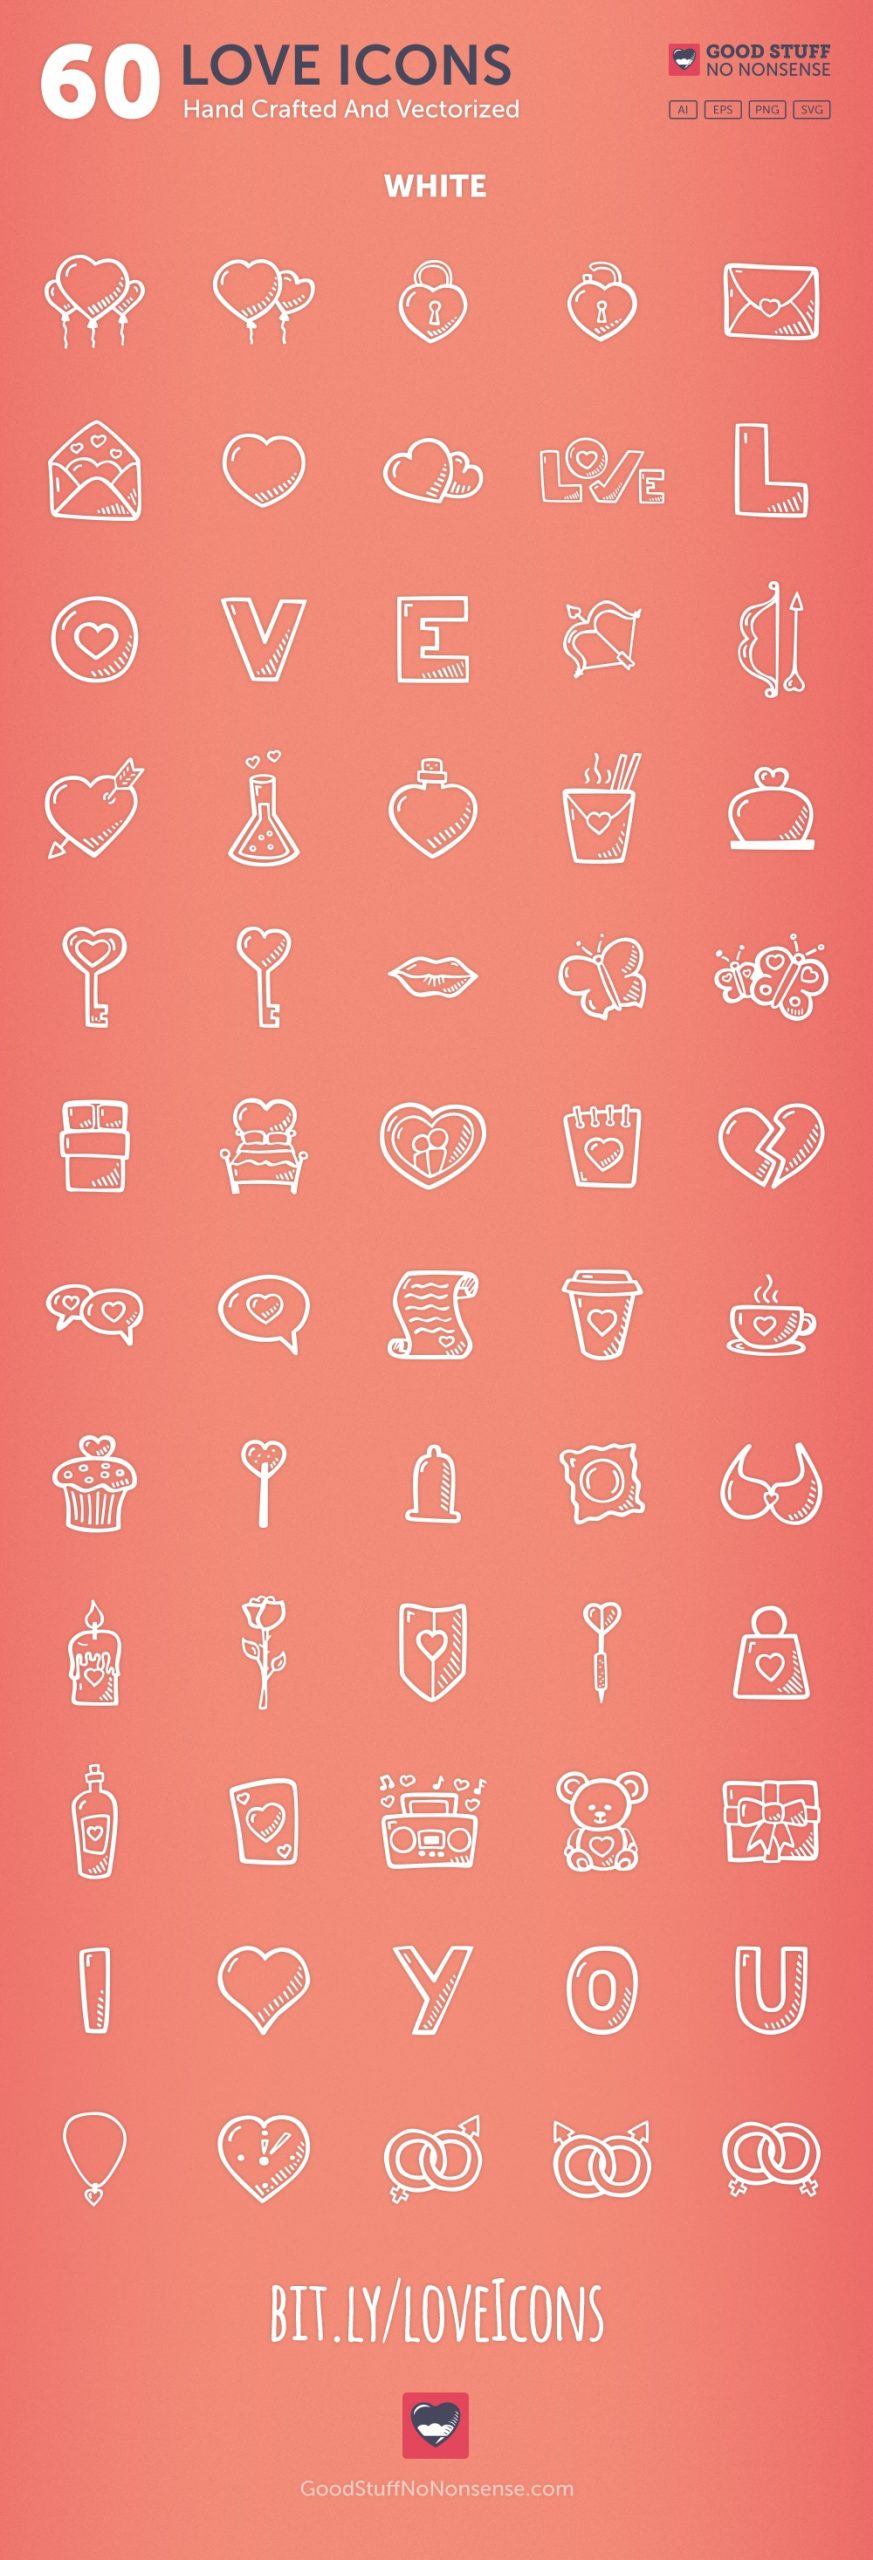 Hand Drawn Love And Valentines Day Icons Vector Pack White